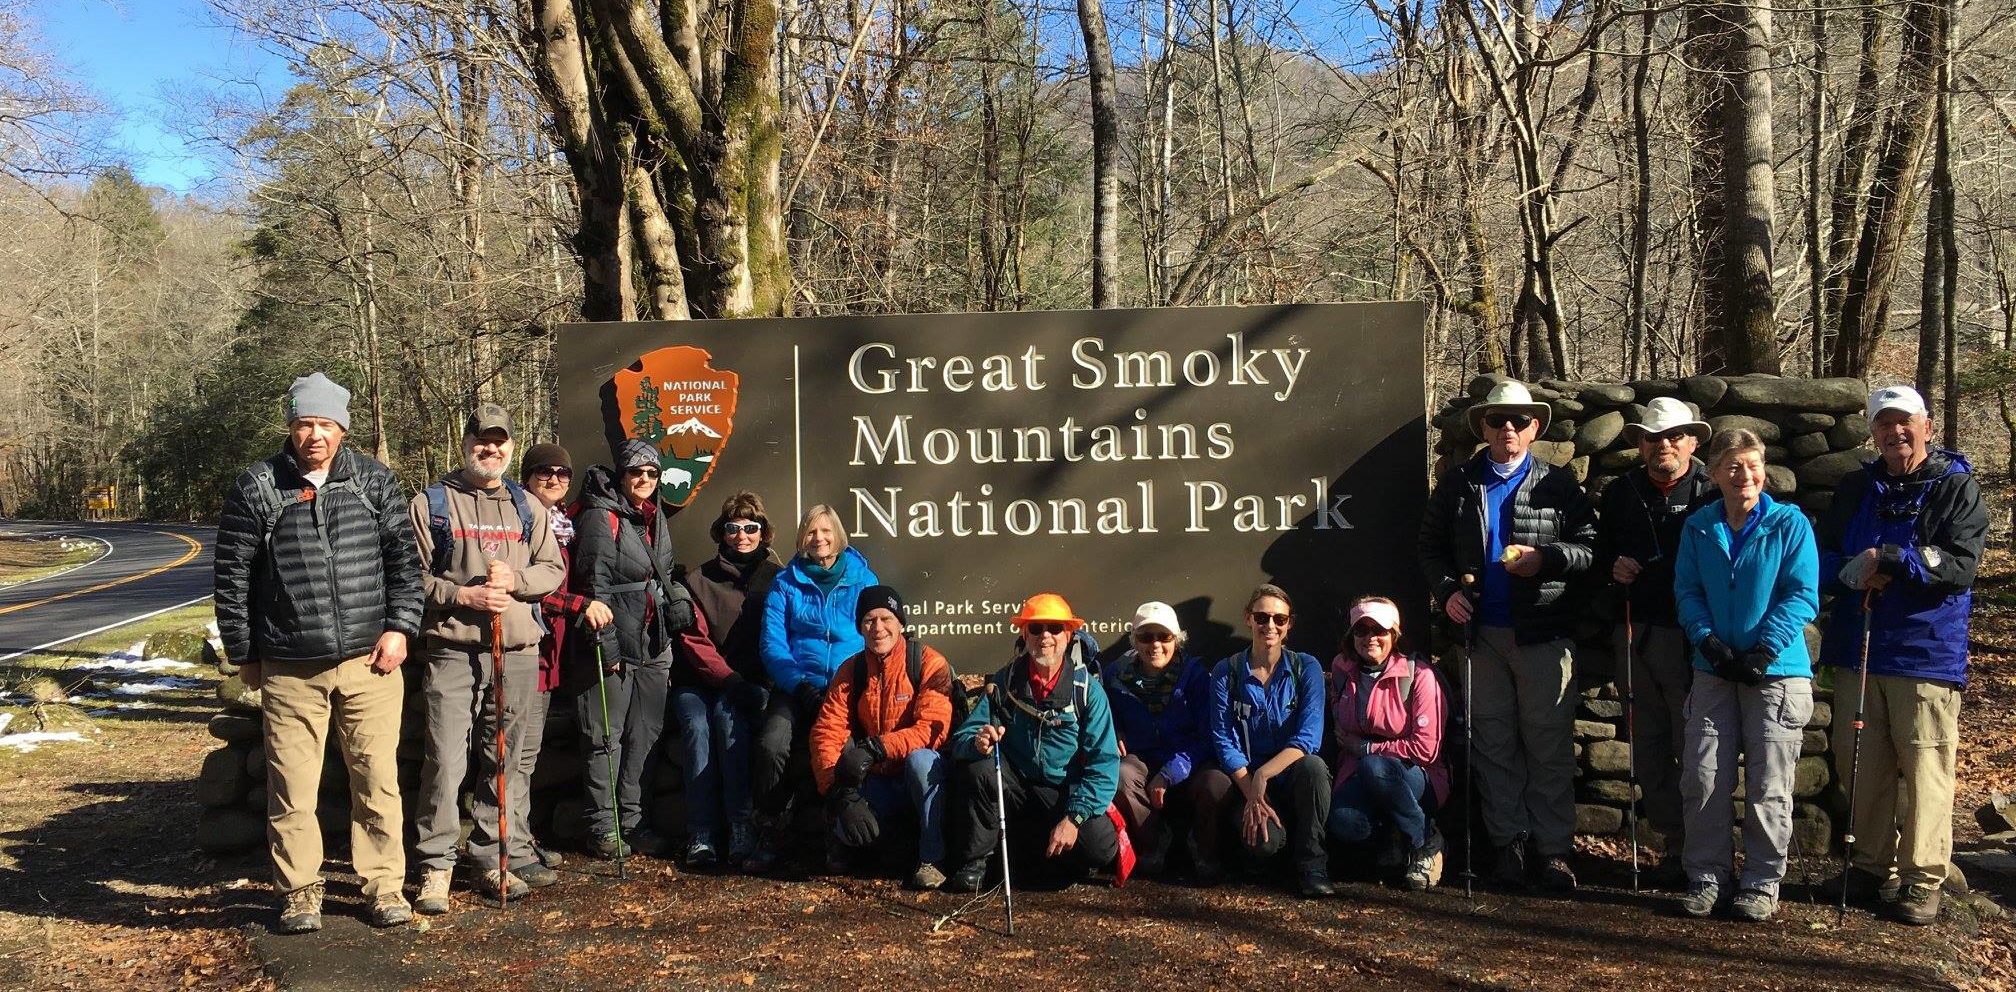 December Classic Hike 2018 hikers with GSMNP sign - photo by Linda Spangler